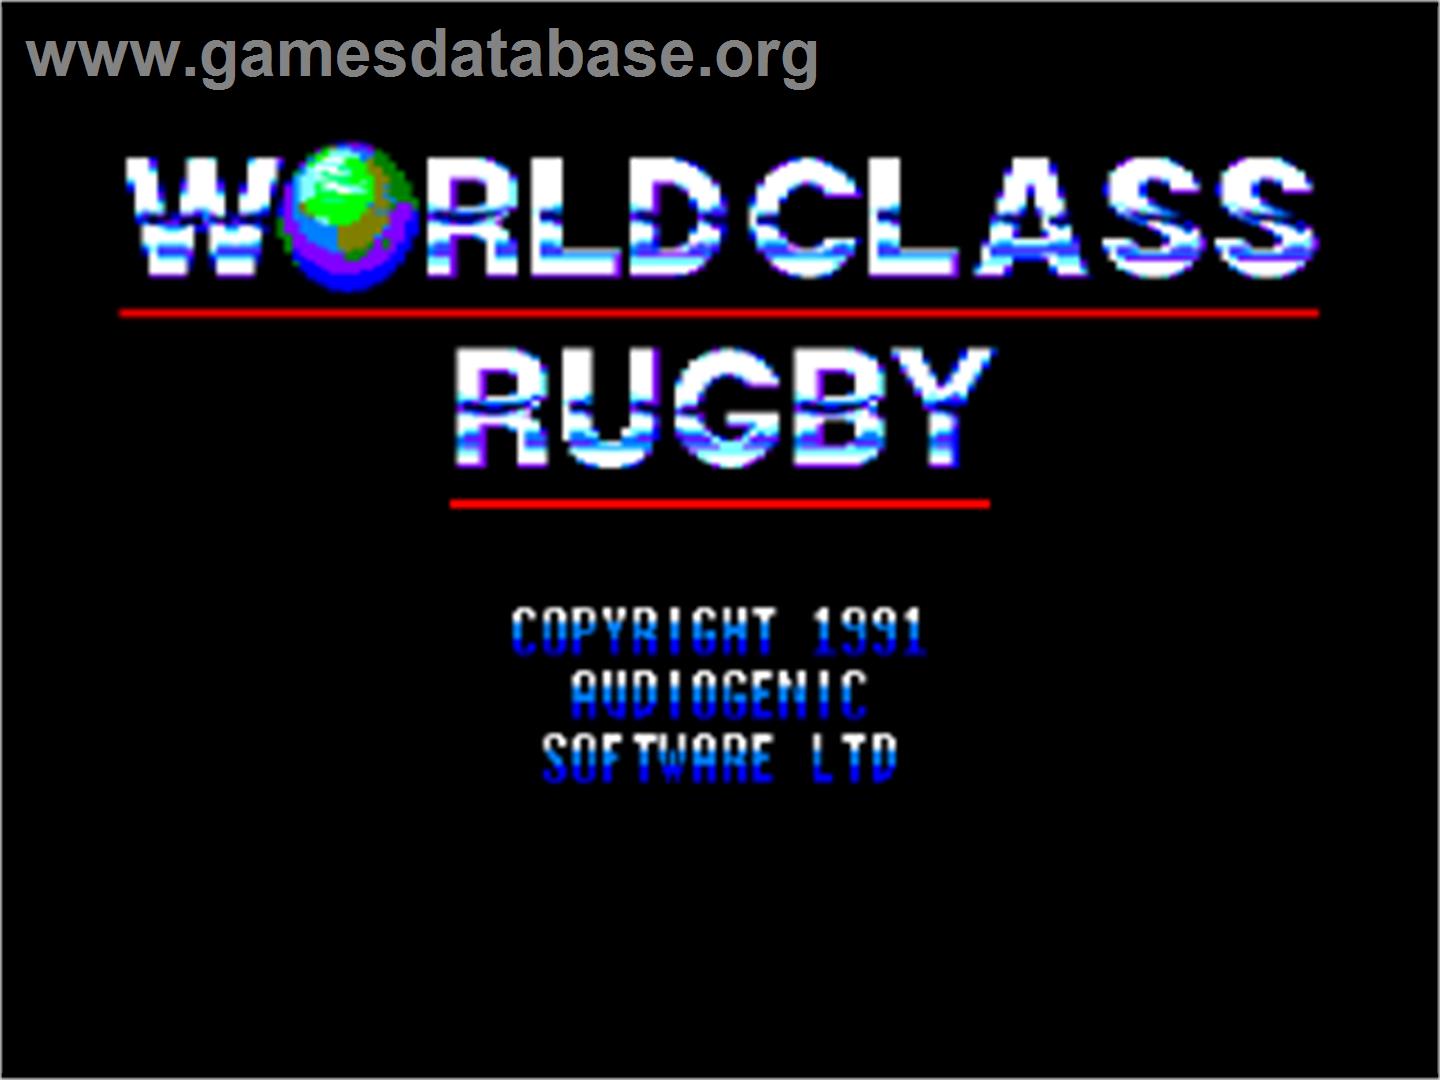 World Class Rugby - Amstrad CPC - Artwork - Title Screen